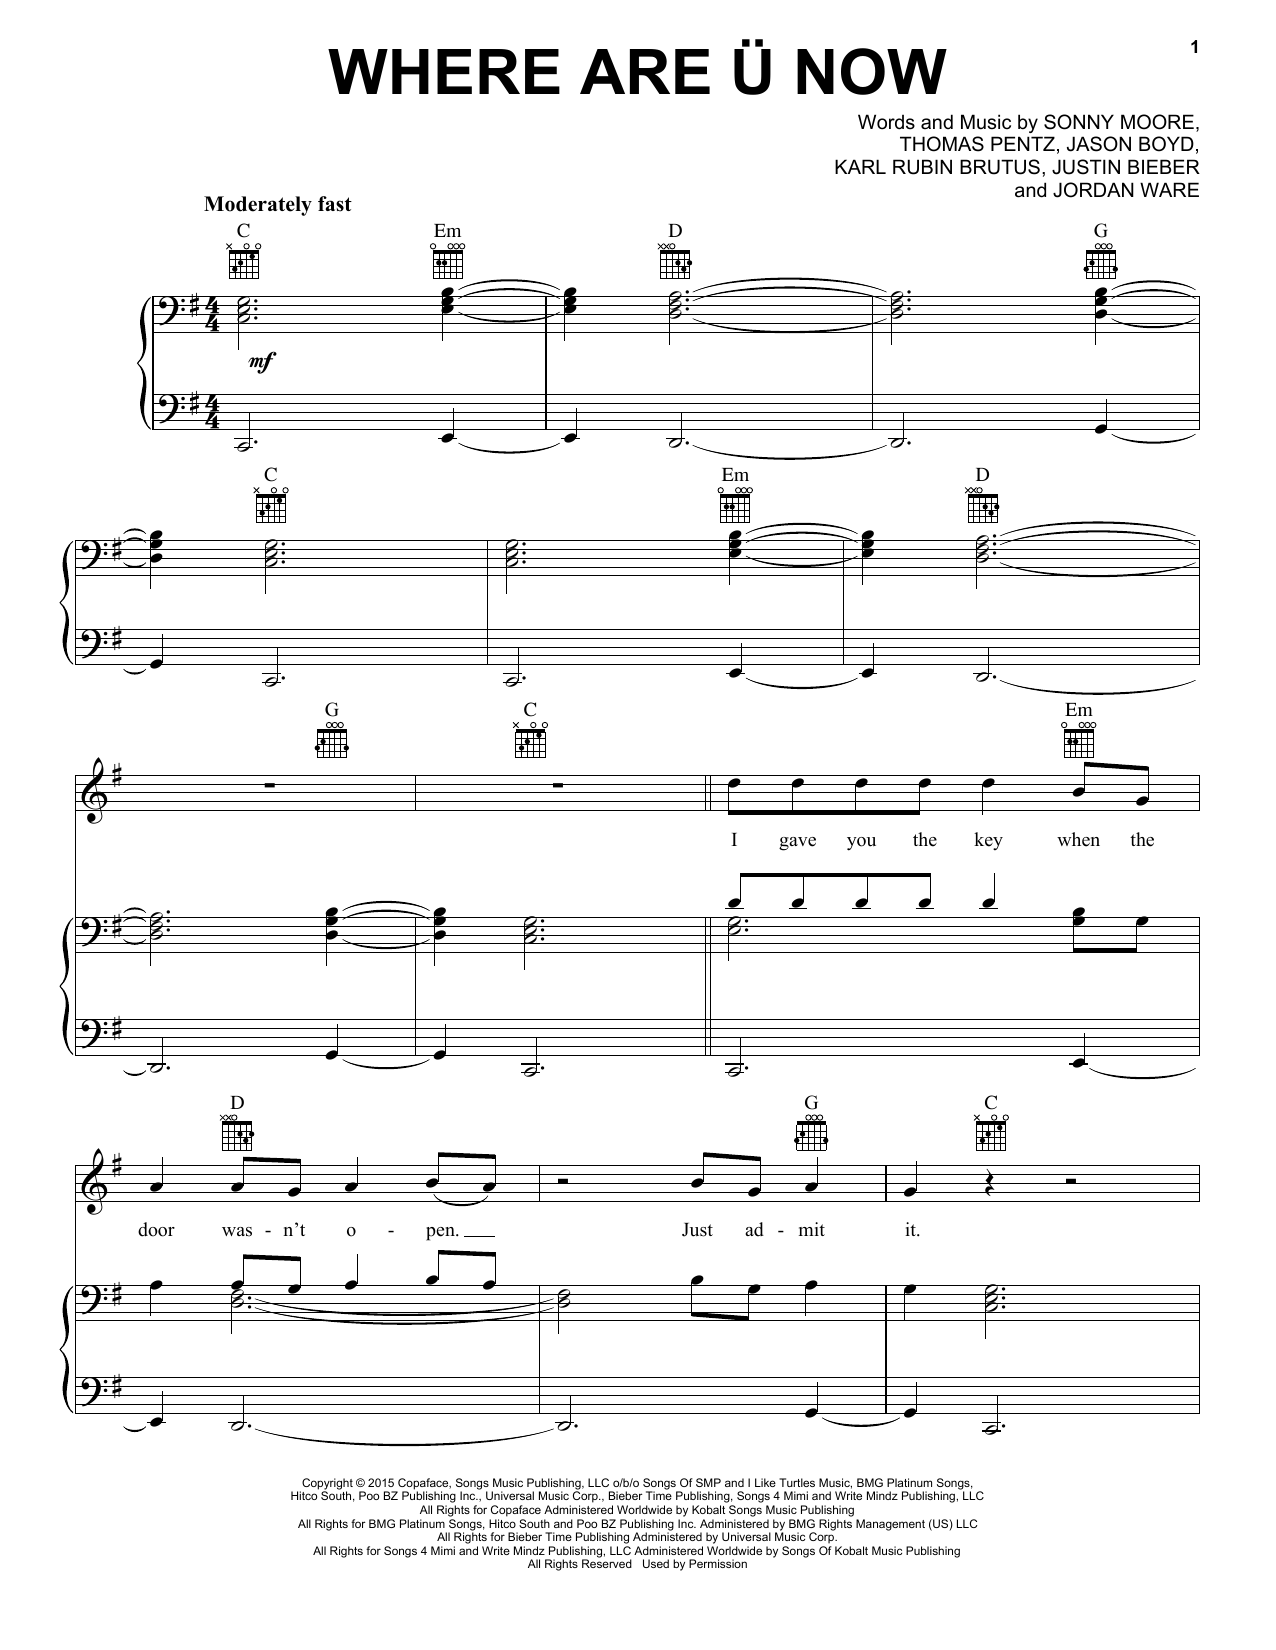 Download Skrillex & Diplo With Justin Bieber Where Are U Now Sheet Music